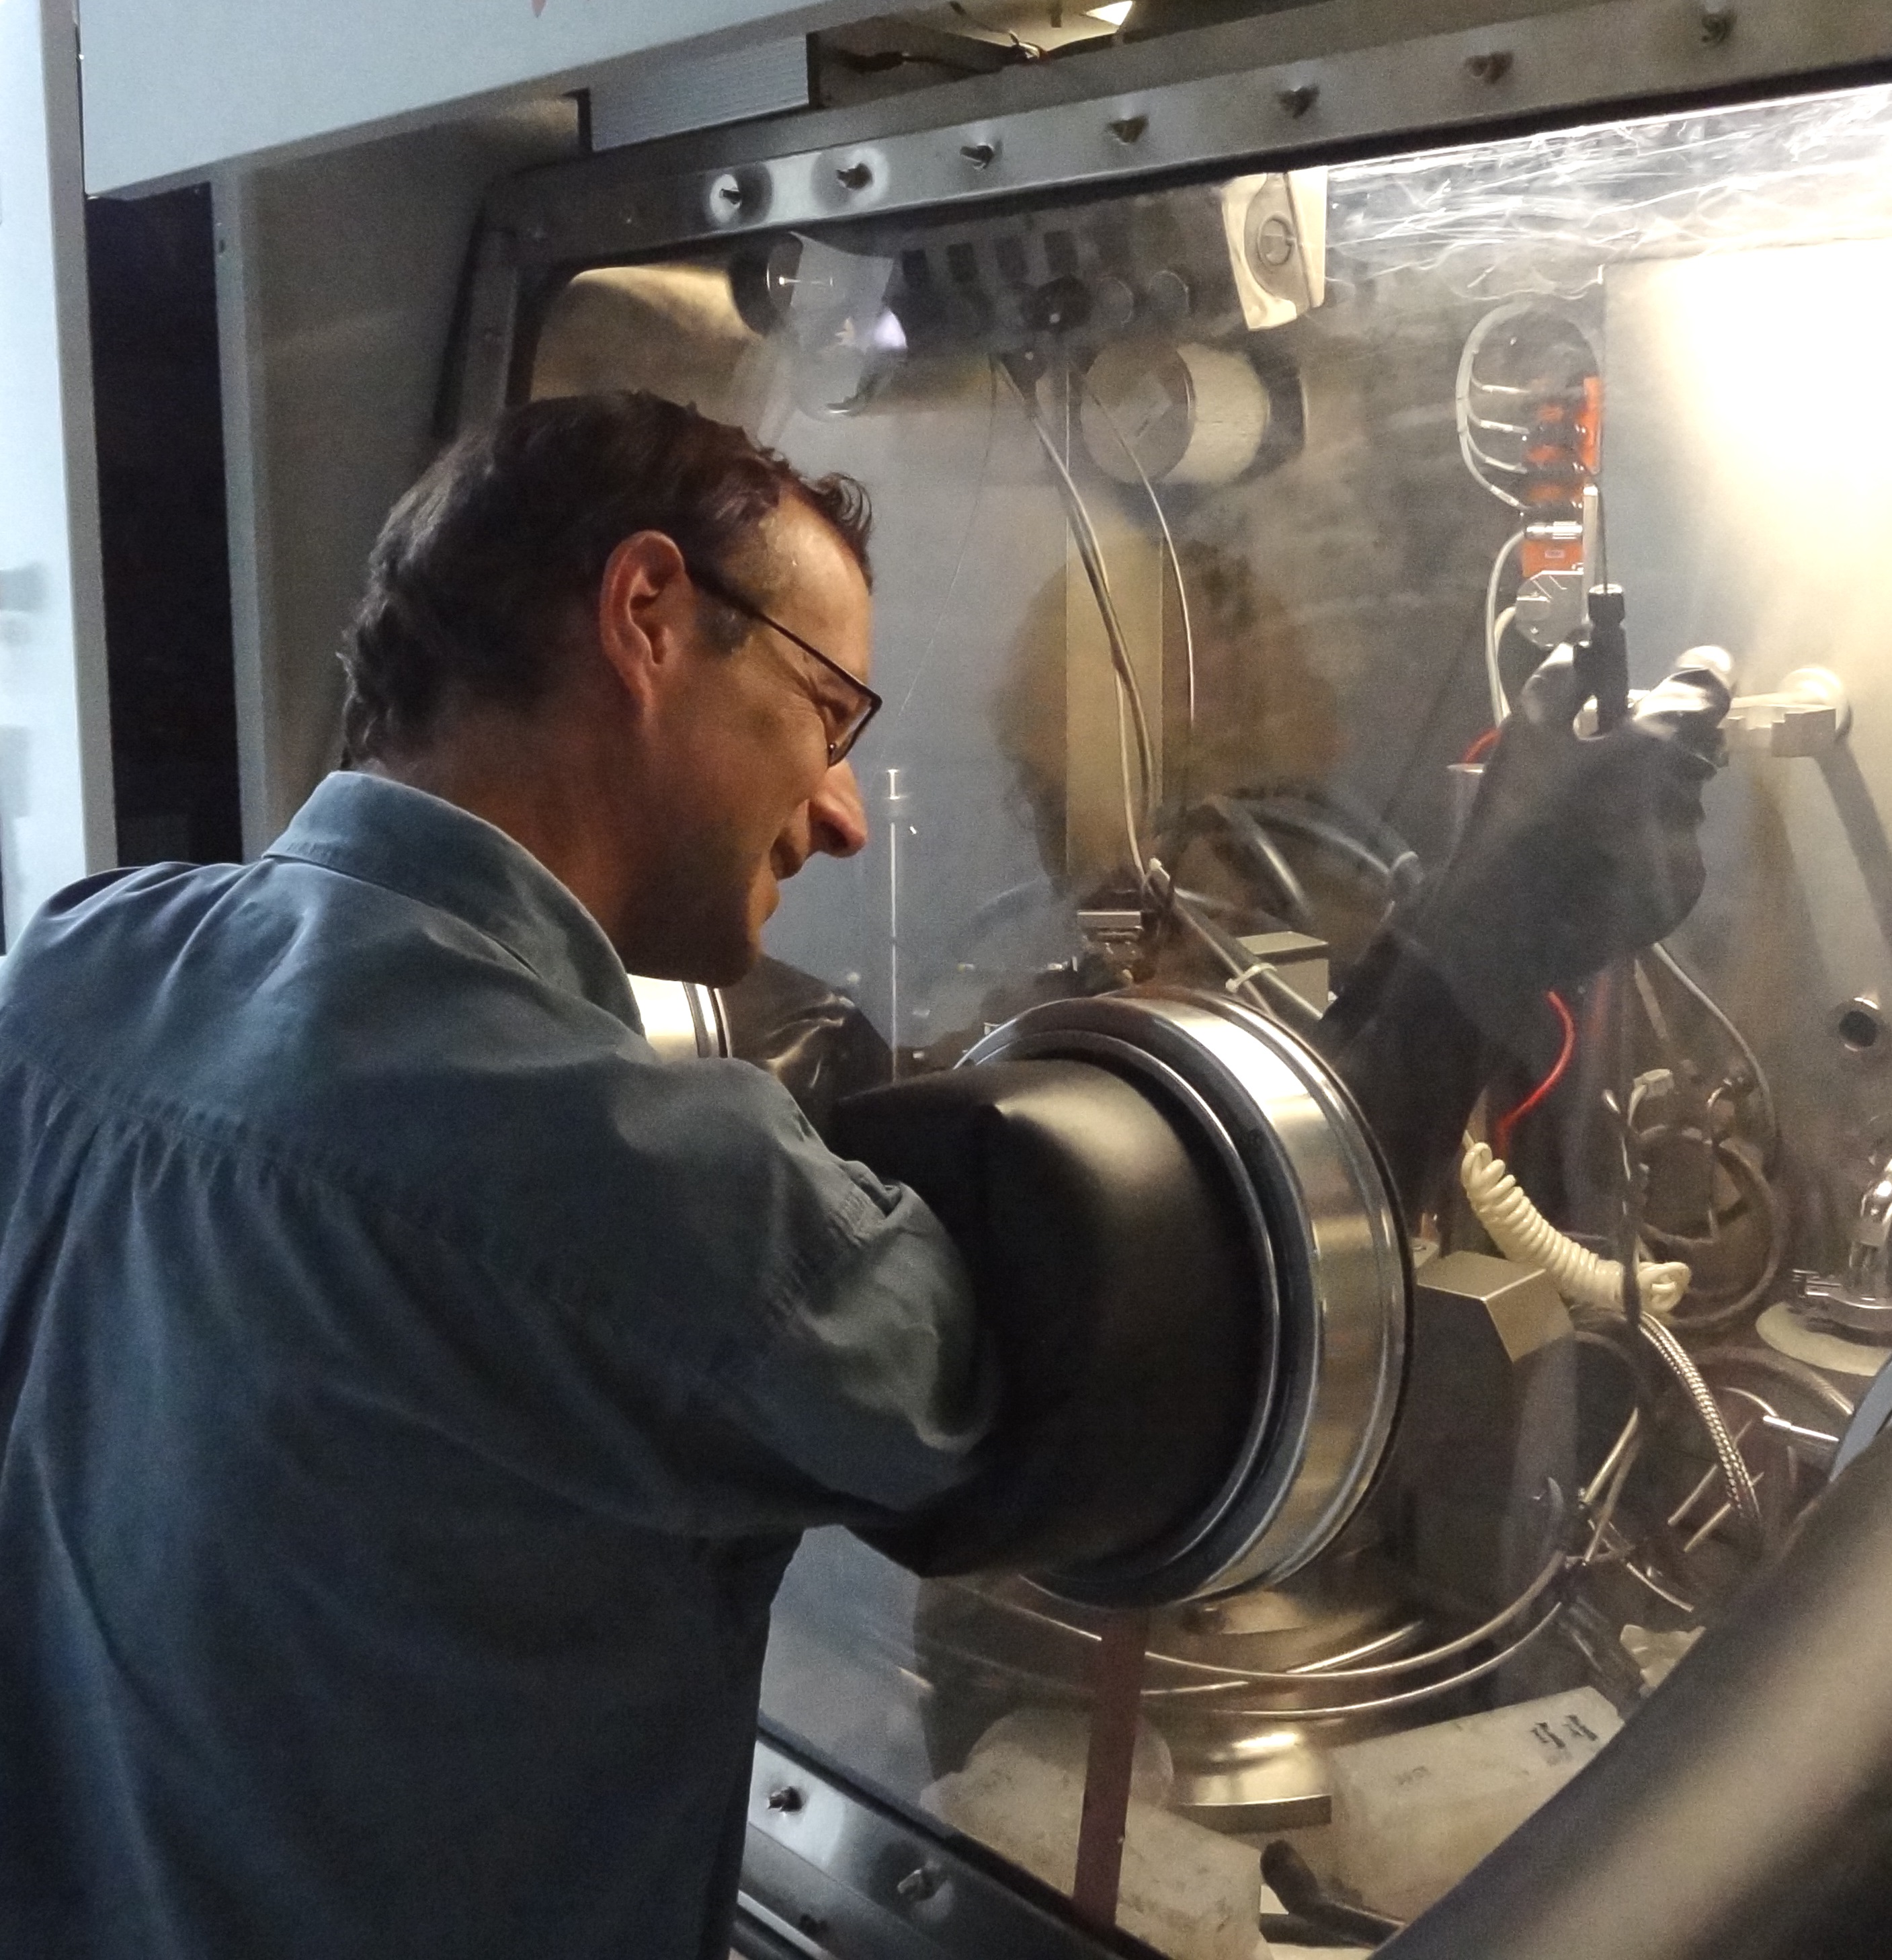 Markus working at the crystal growth reactor, using a glovebox.